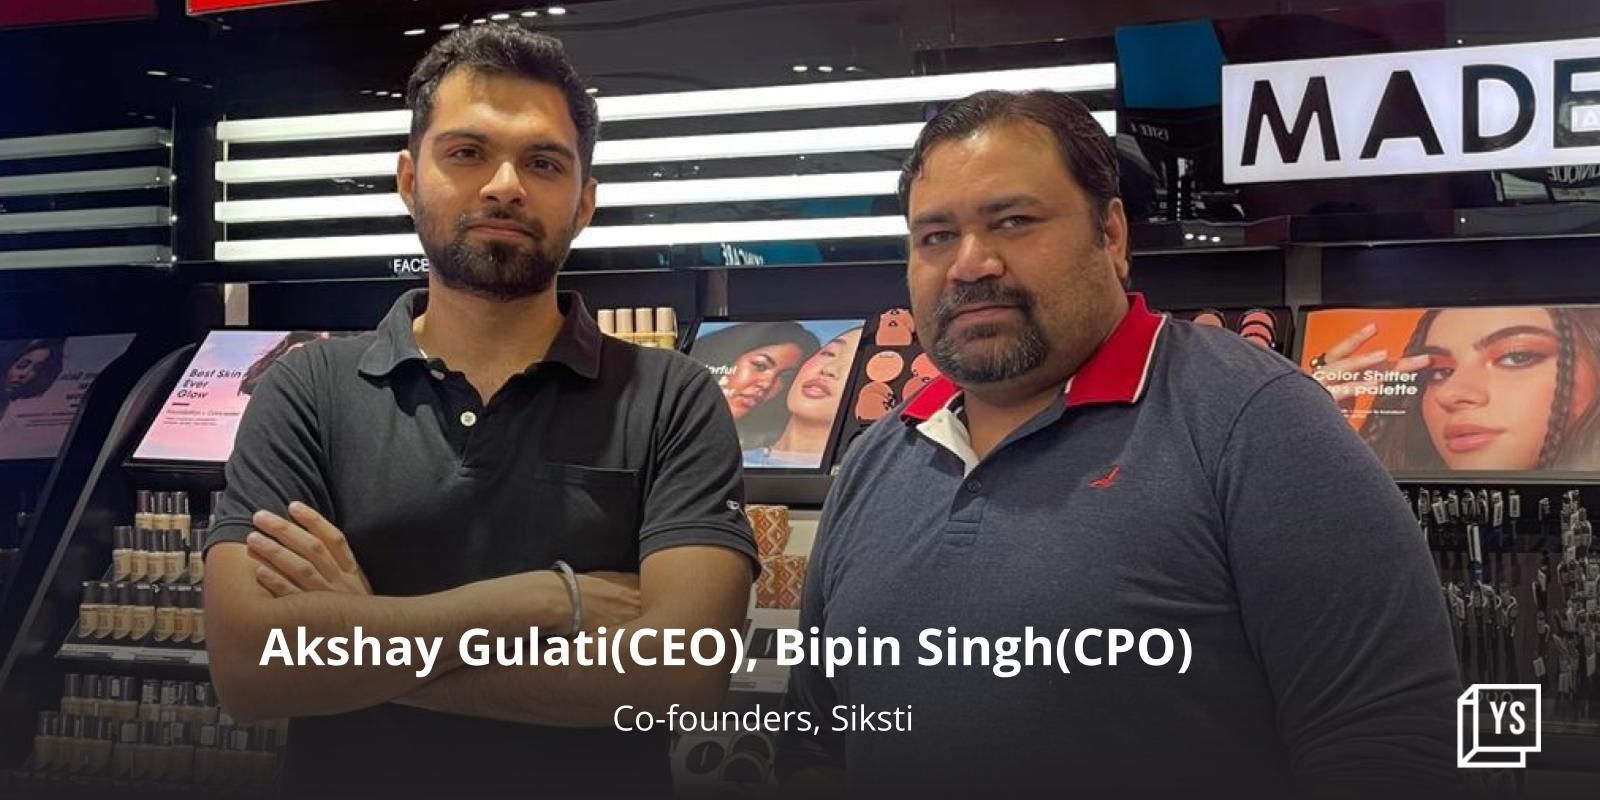 Quick ecommerce: Siksti’s hyperlocal app promises to deliver beauty, fashion in 60 min 